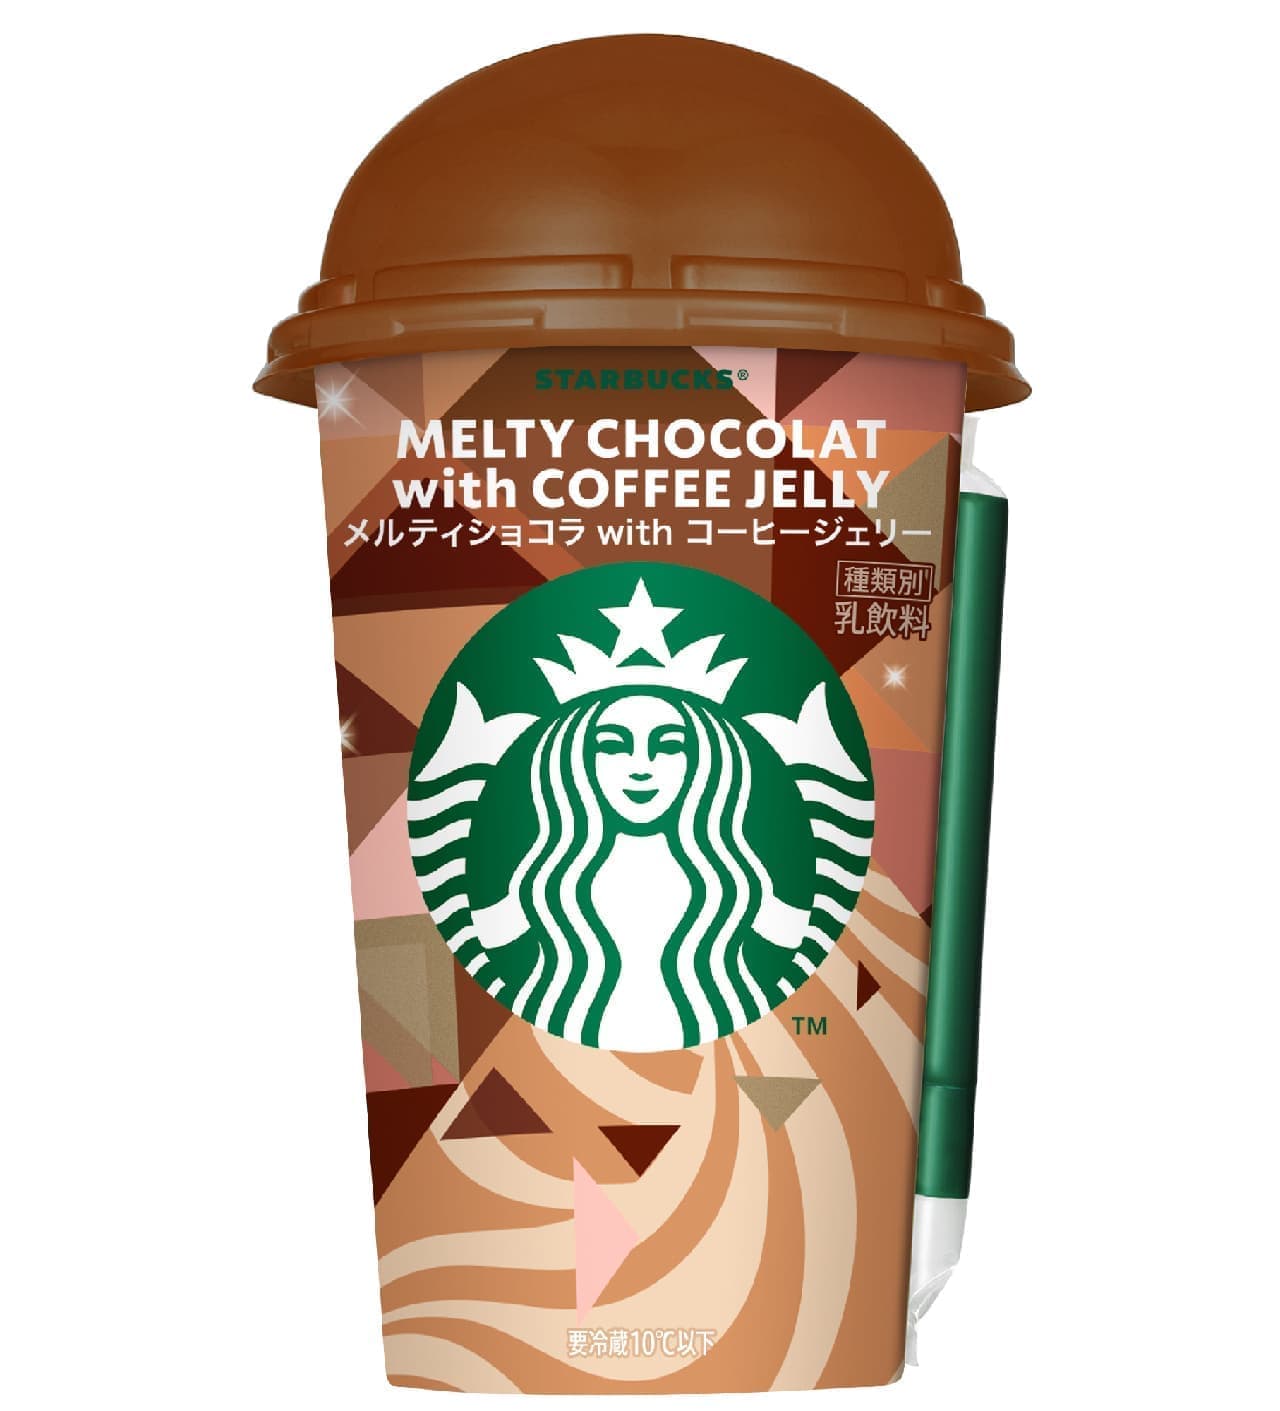 Famima exclusive "Starbucks Melty Chocolat with Coffee Jelly".